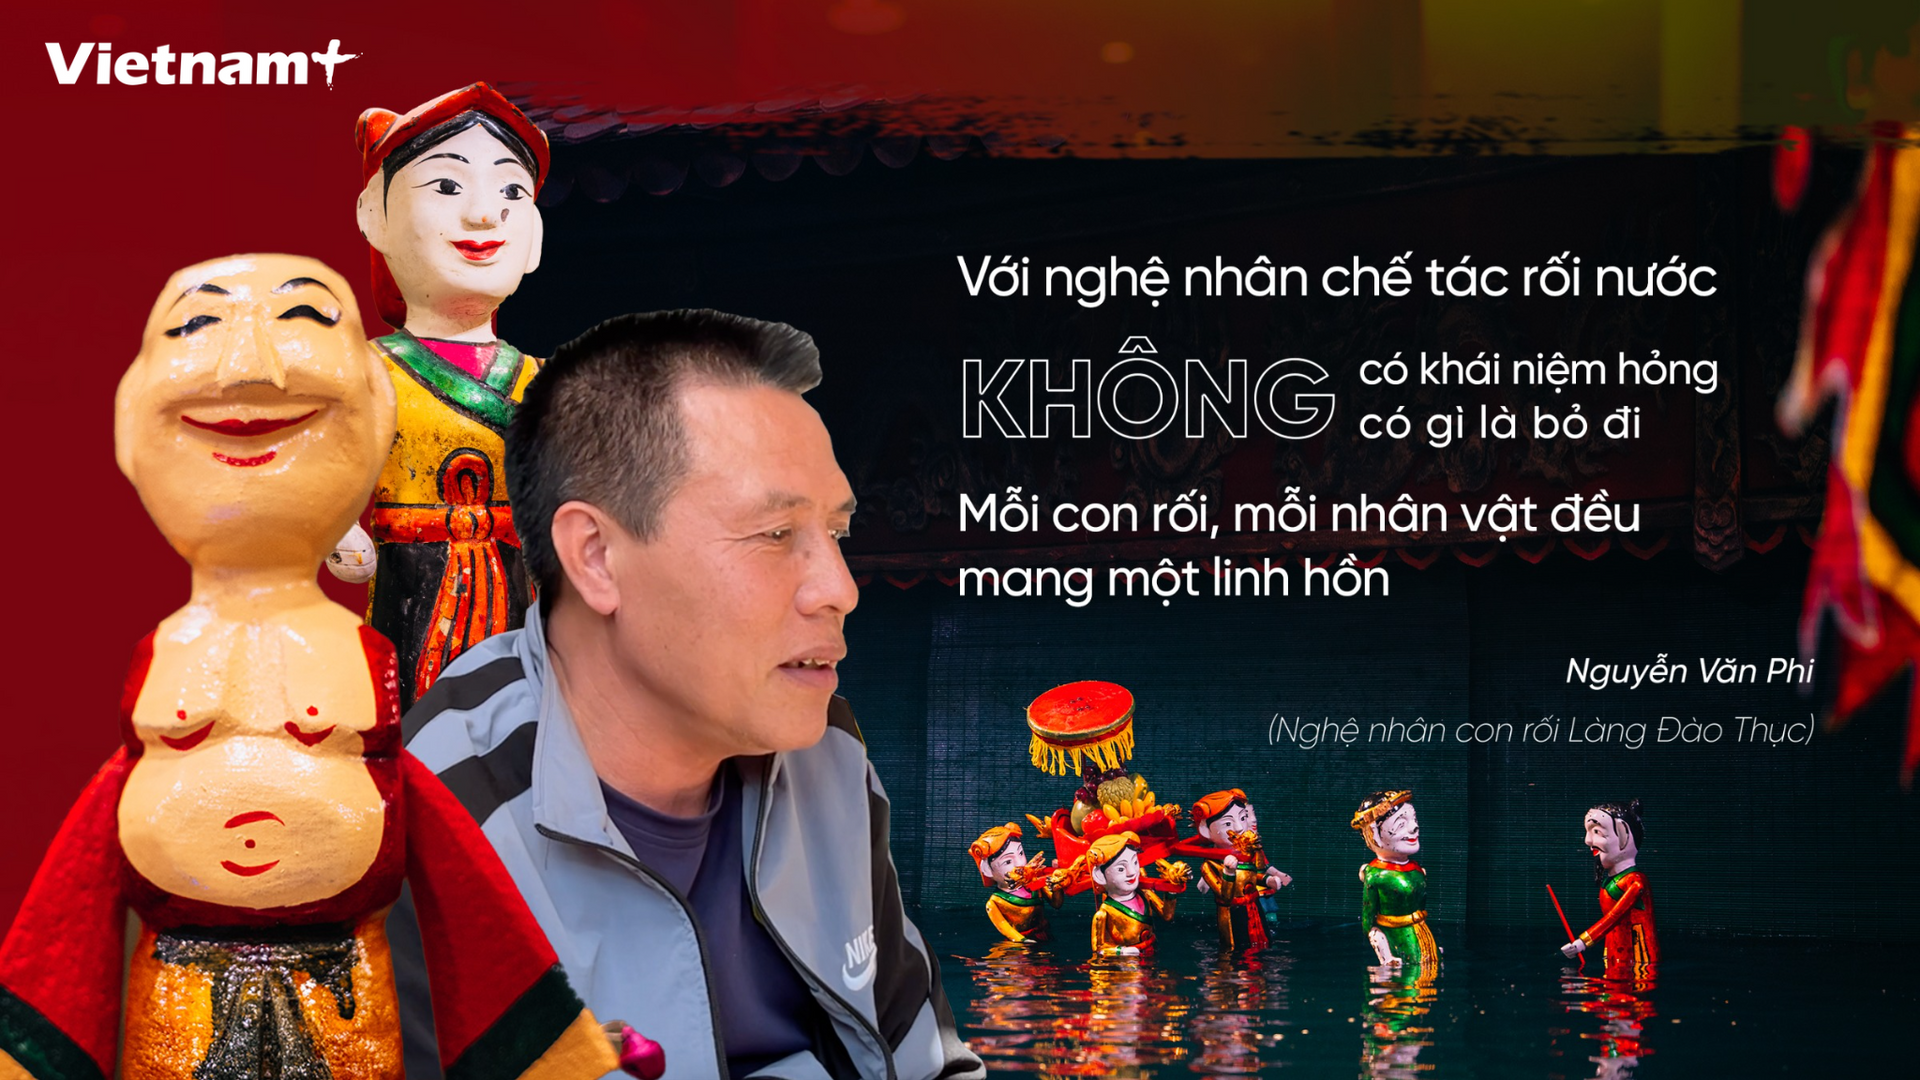 14.-quote-3-voi-nghe-nhan-che-tac.png